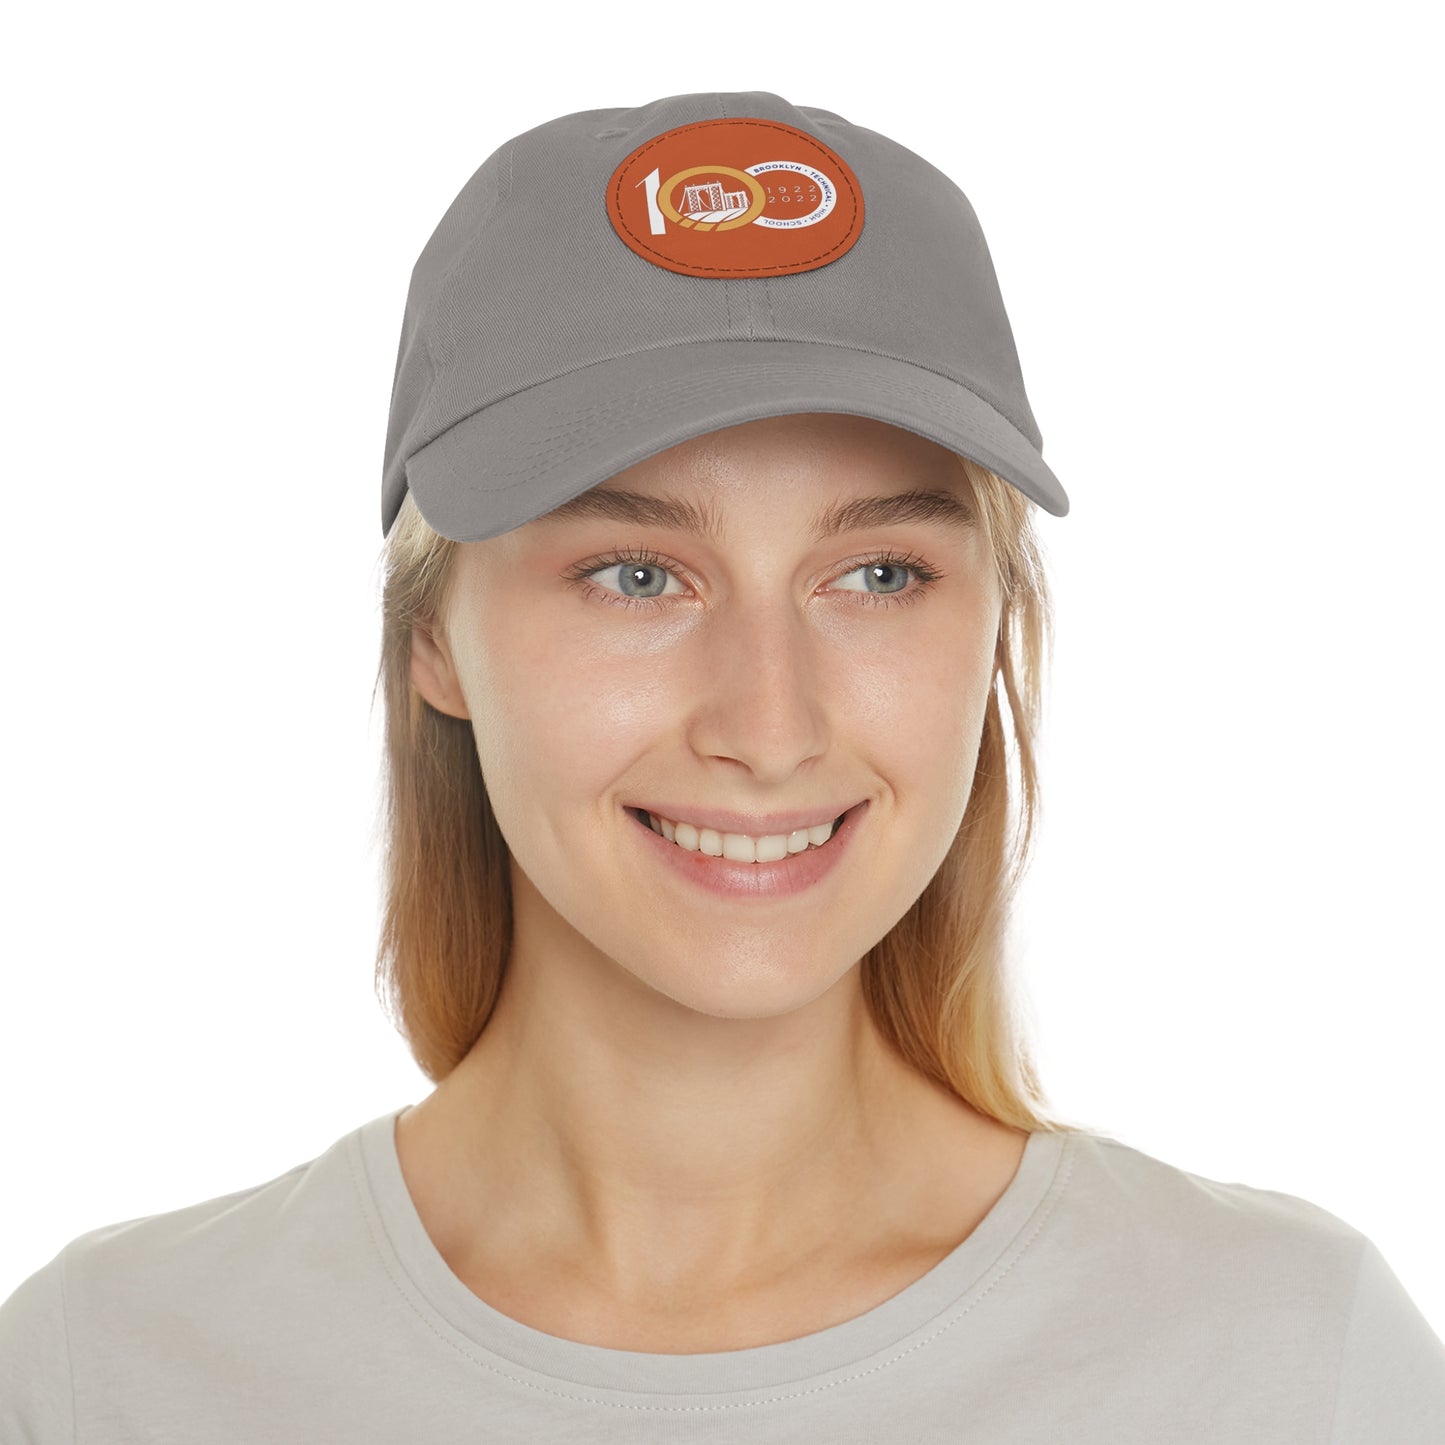 Centennial - Hat With Circular Leather Patch